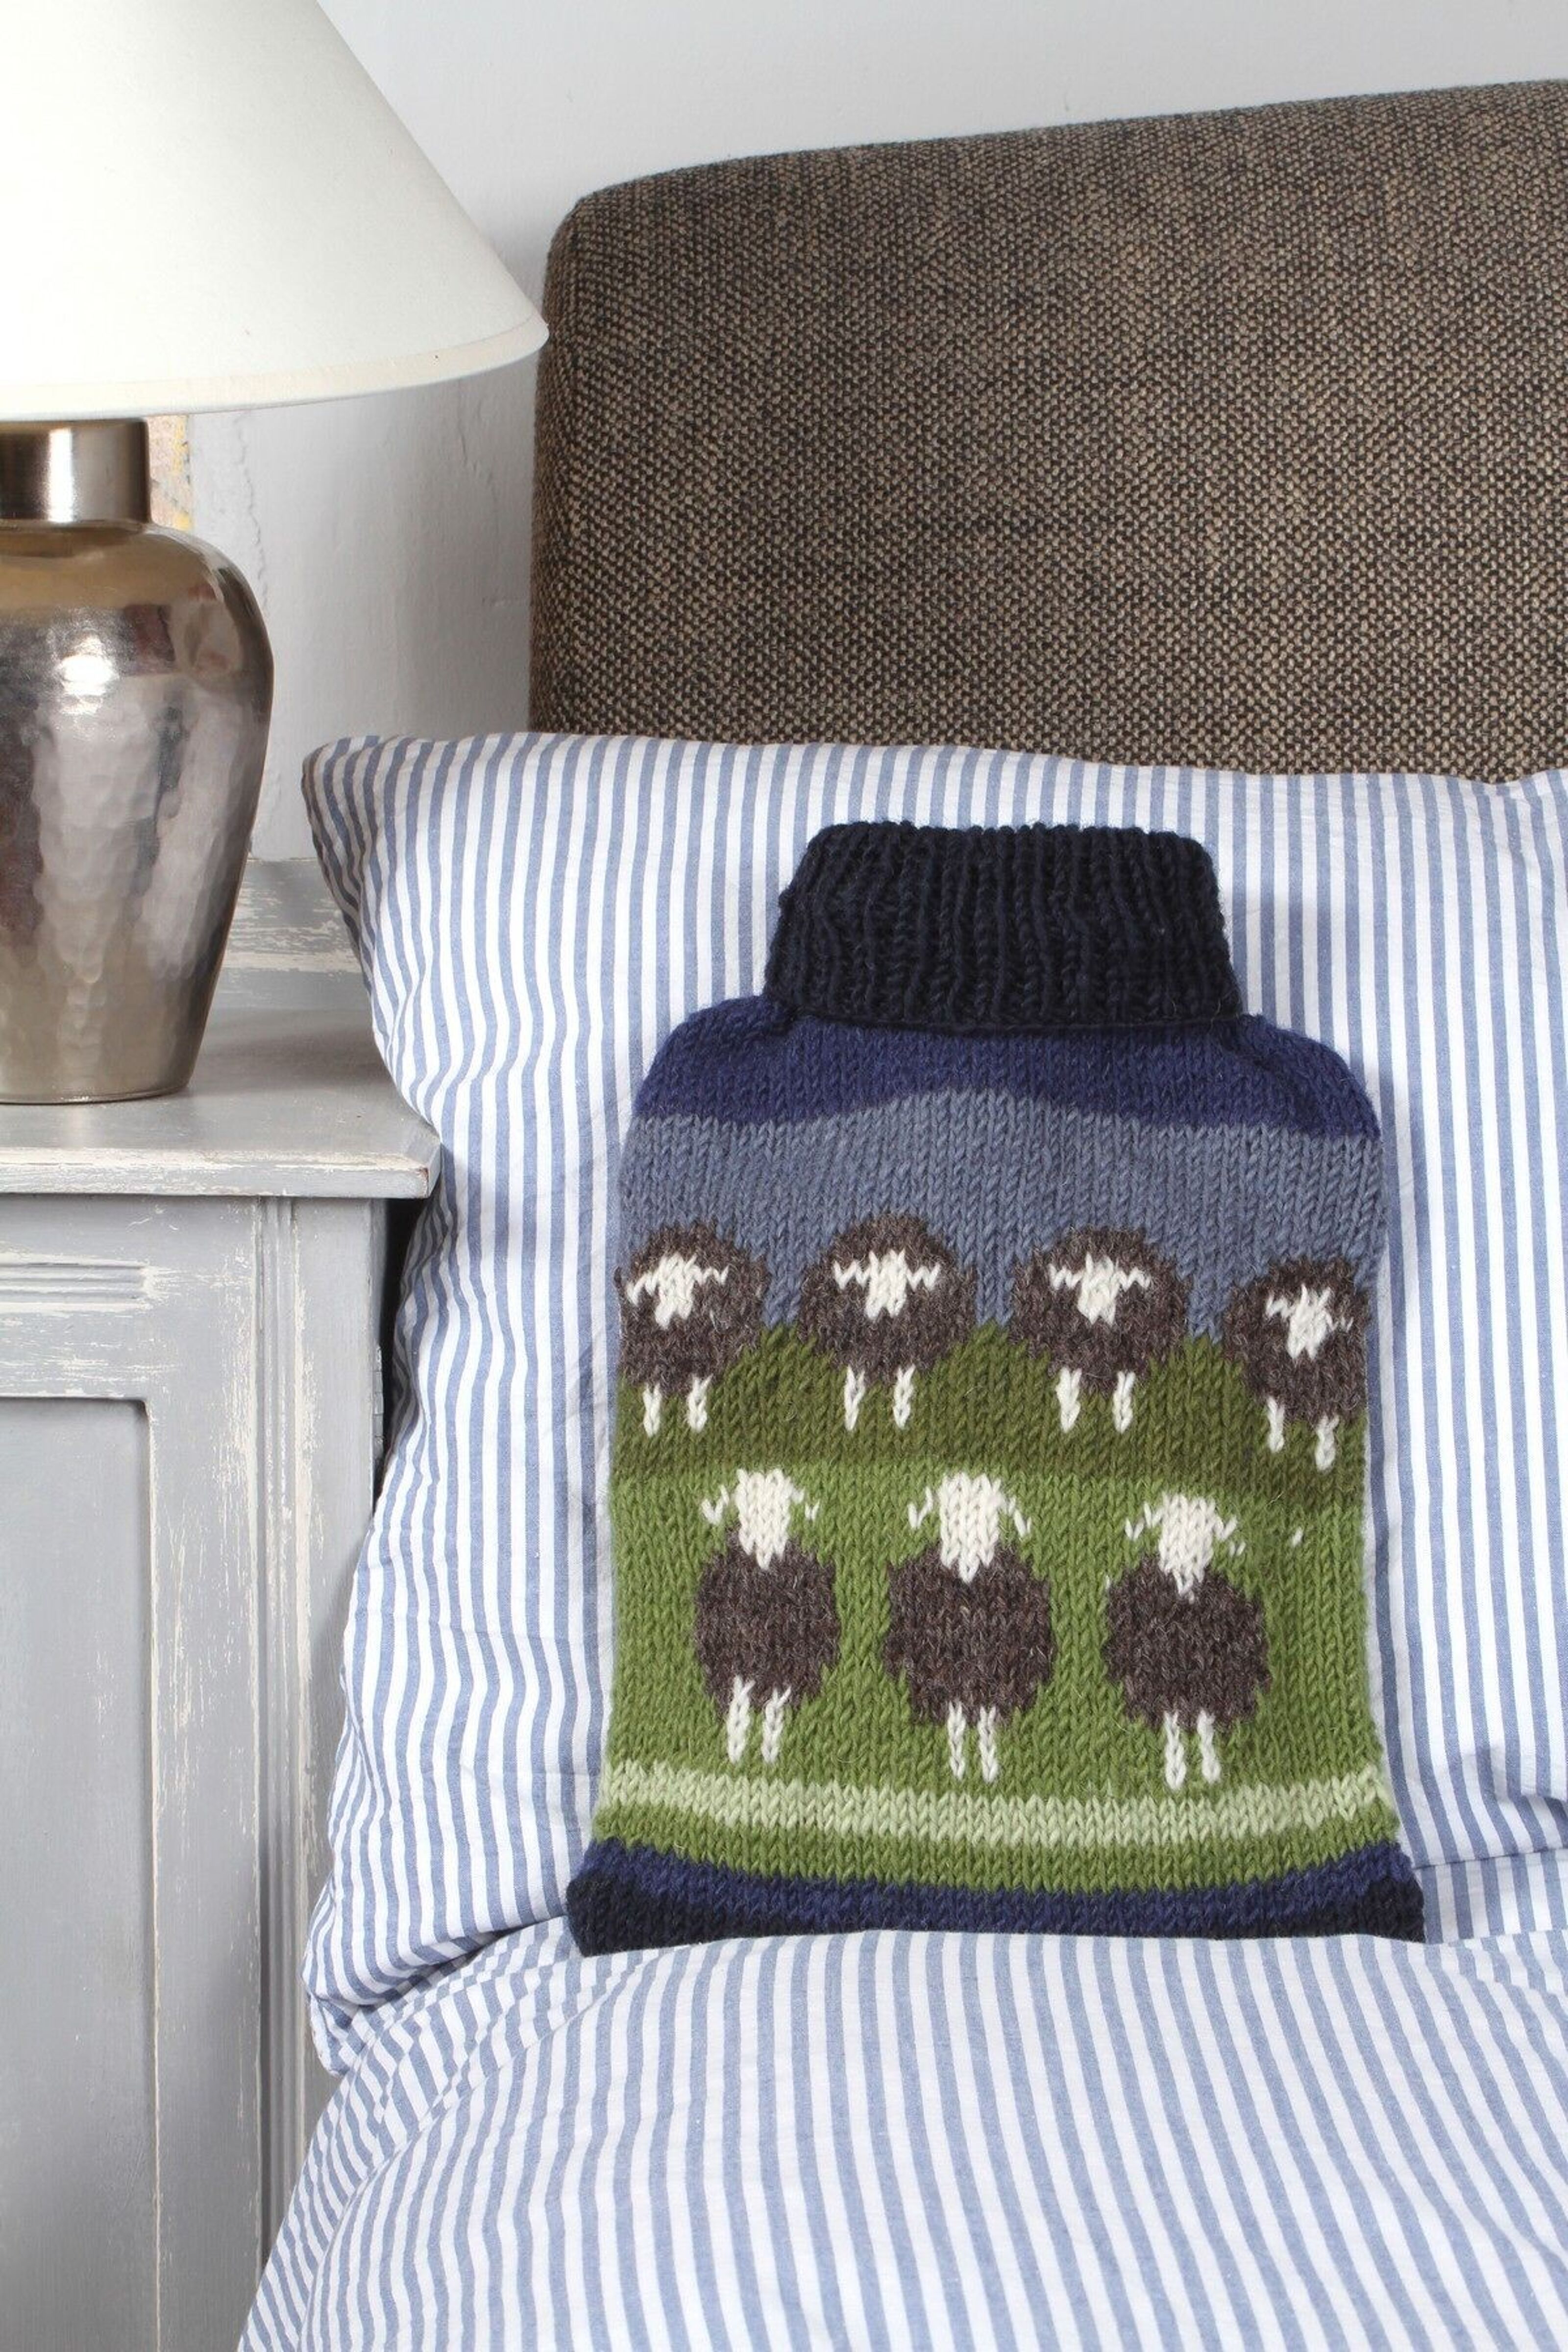 Sheep Hot Water Bottle Cover, Knitting Patterns